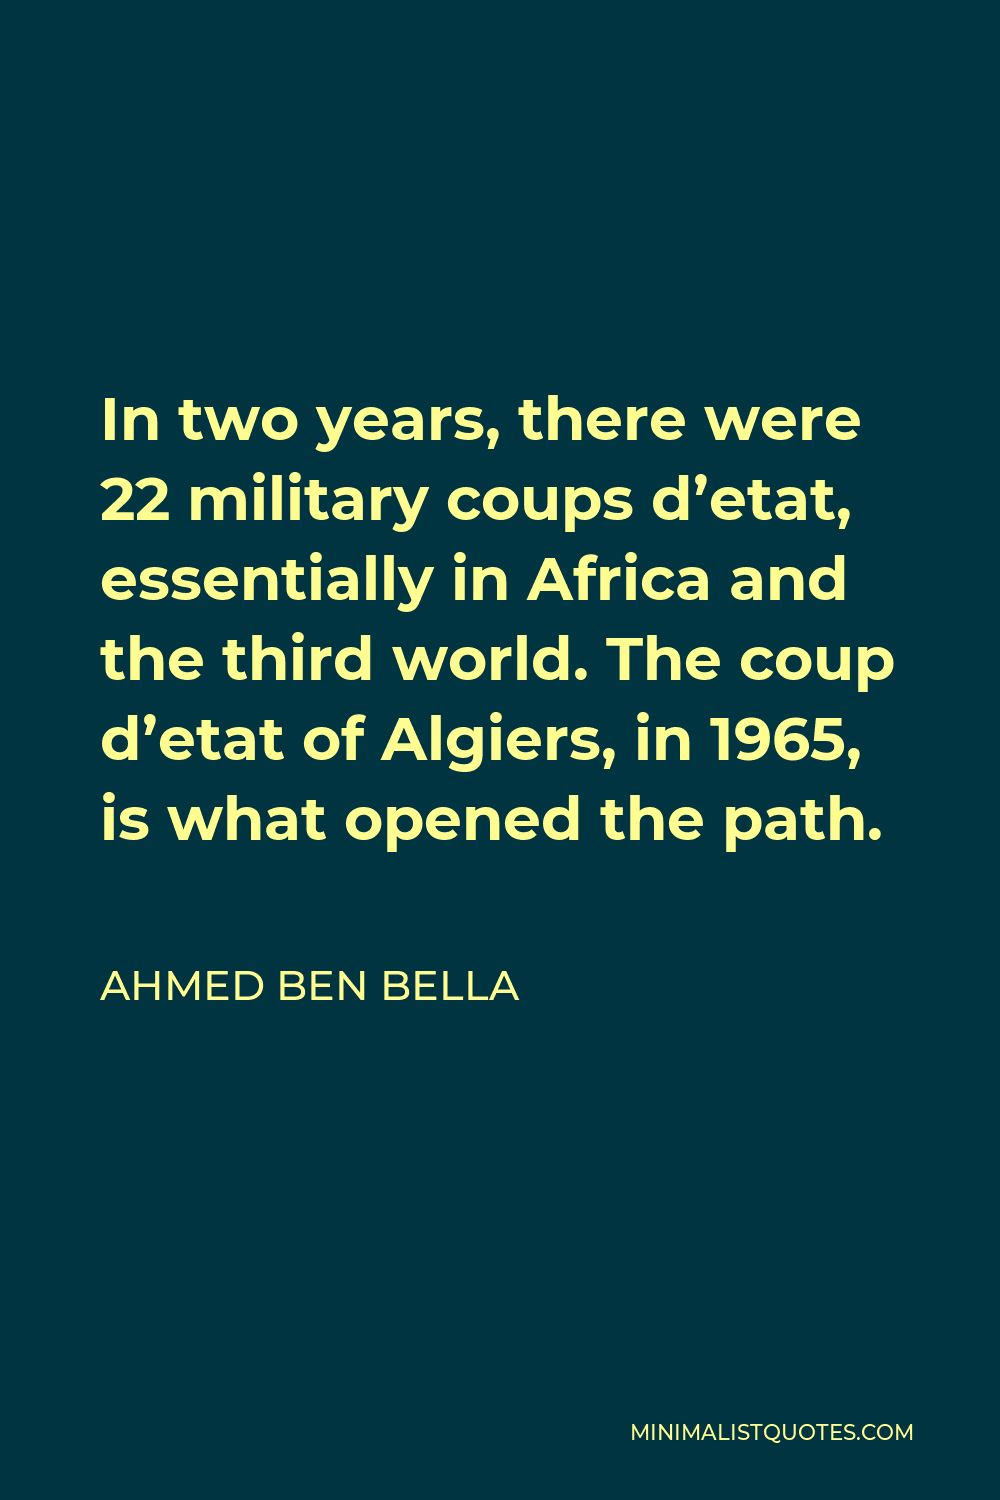 Ahmed Ben Bella Quote - In two years, there were 22 military coups d’etat, essentially in Africa and the third world. The coup d’etat of Algiers, in 1965, is what opened the path.